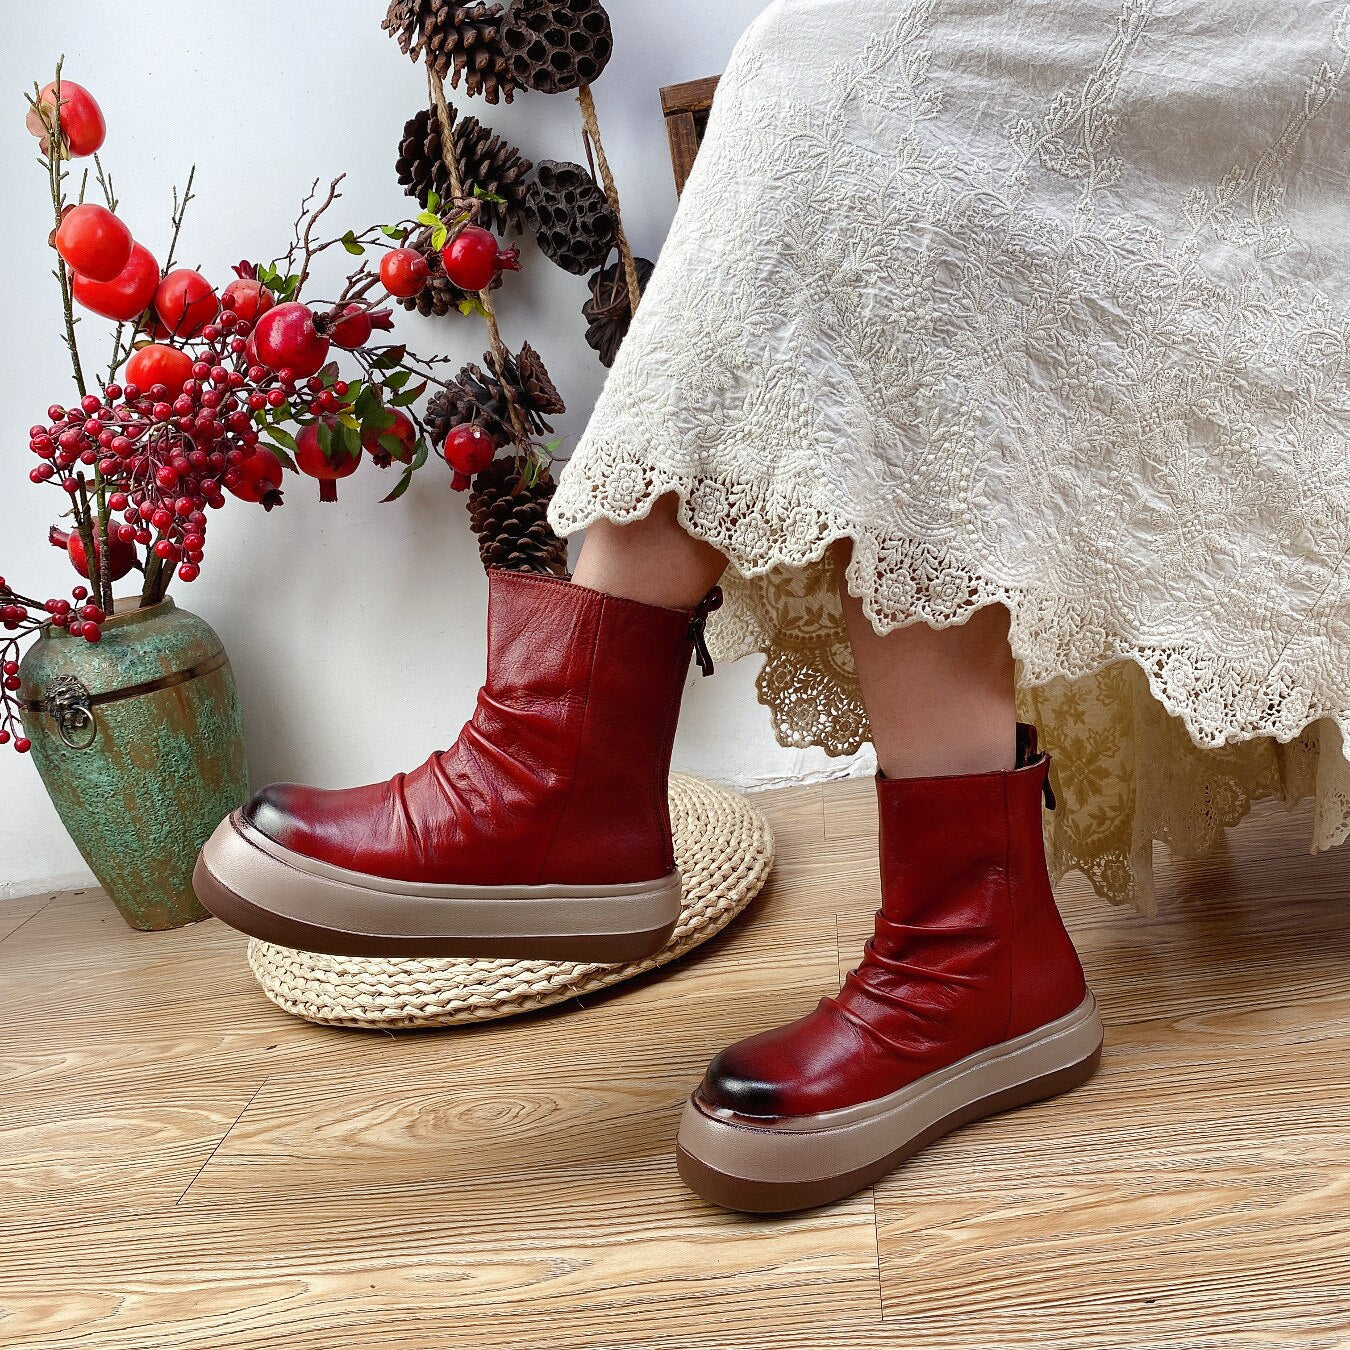 Concise Handmade Leisure Ankle Boots